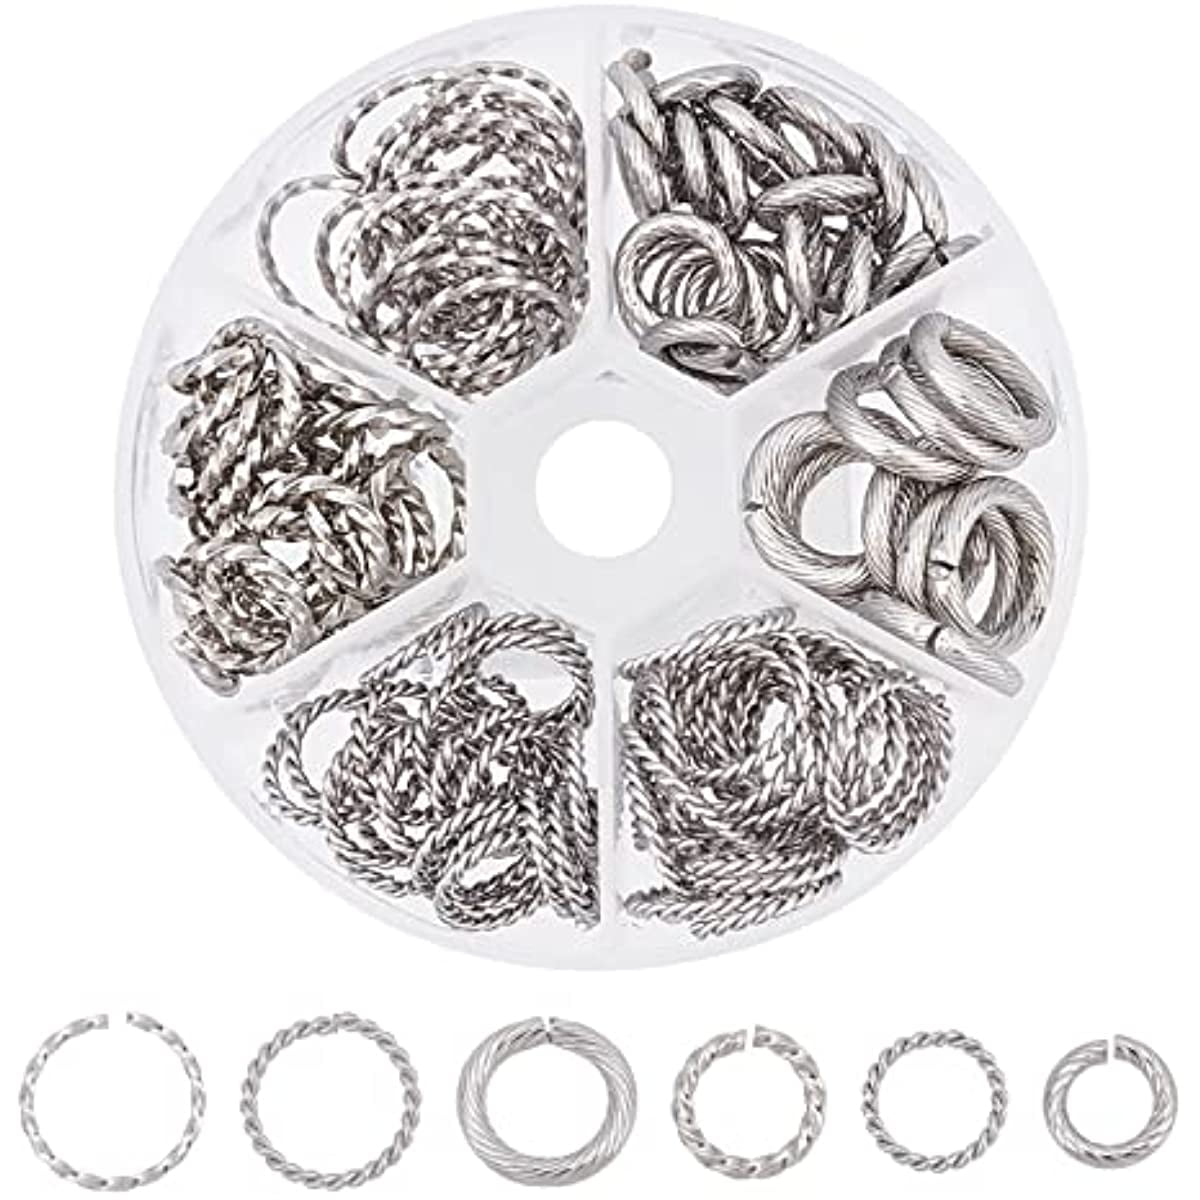  DADIFEN 304 Stainless Steel Jump Rings for Jewelry Making Open  Jump Rings 4/5/6/8/9/10mm Silver O Rings for DIY Making Bracelet Earrings  Necklace Connectors